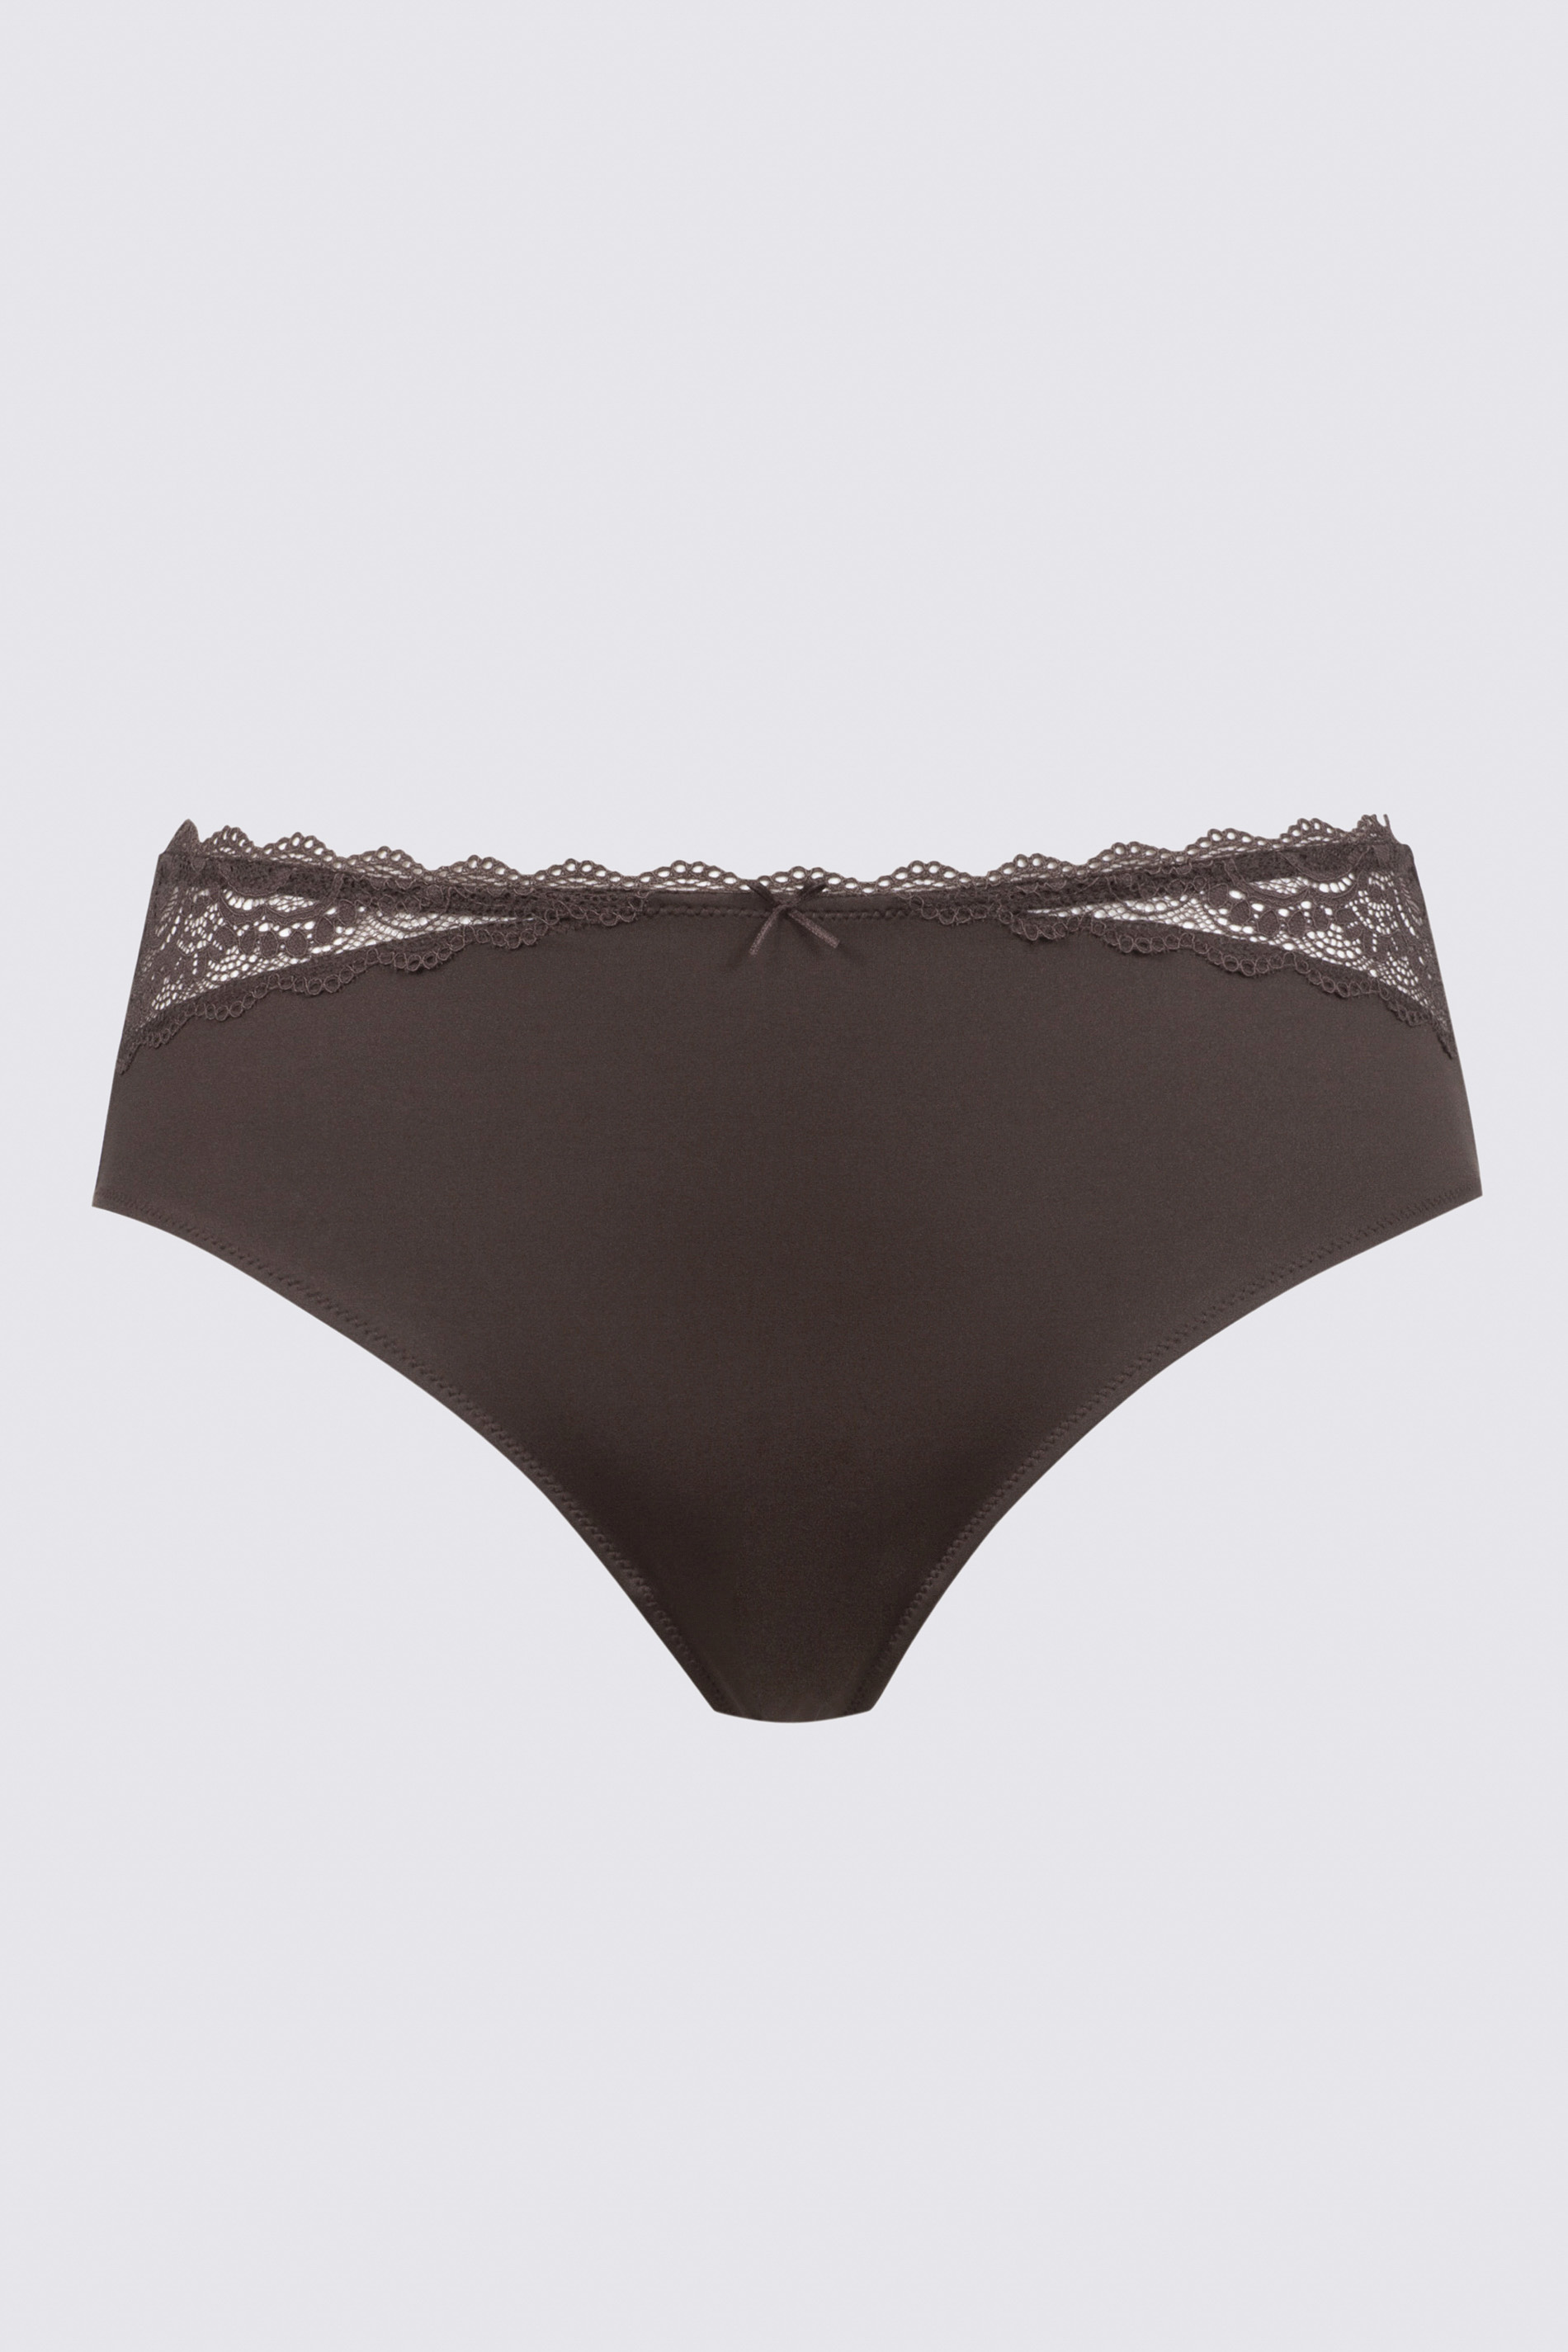 American-pants Liquorice Brown Serie Amorous Uitknippen | mey®